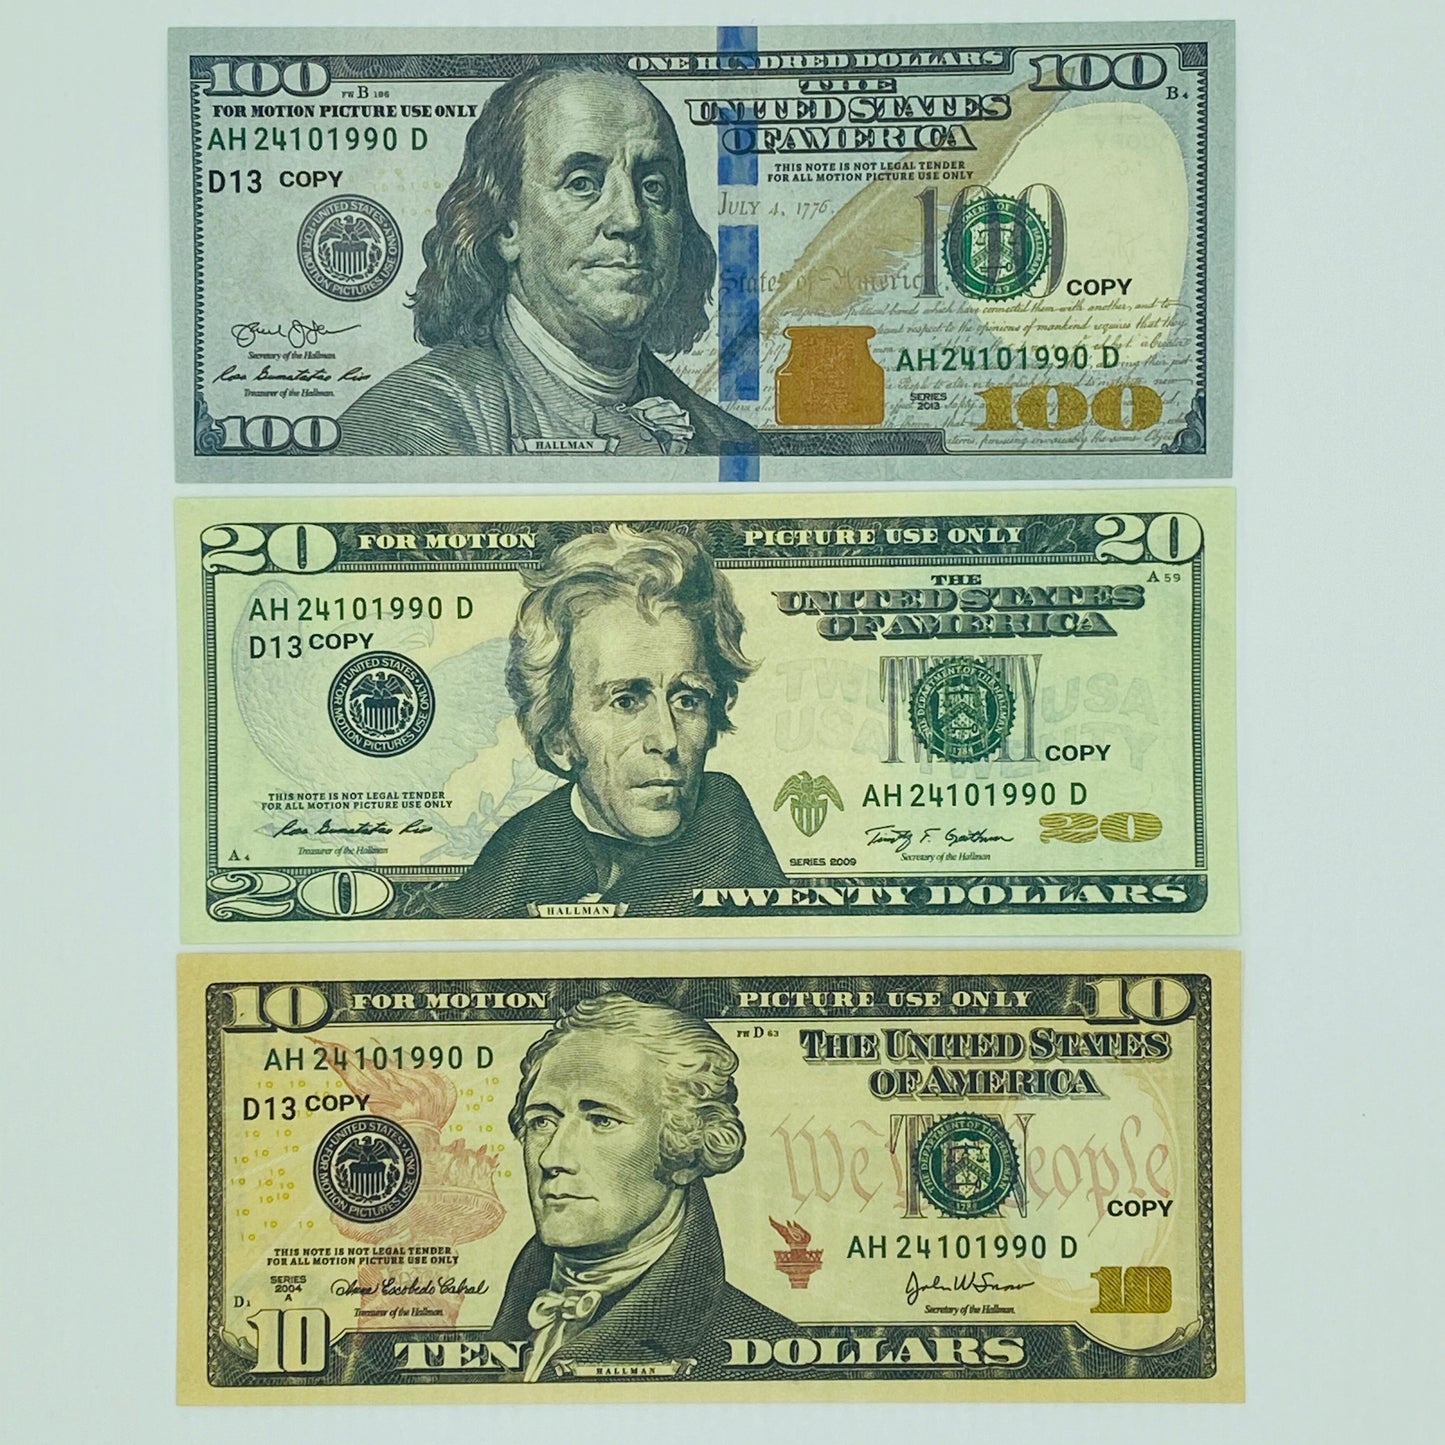 Prop Money Mix $100 $50 $20 Looks Real Double Side Fake Bills